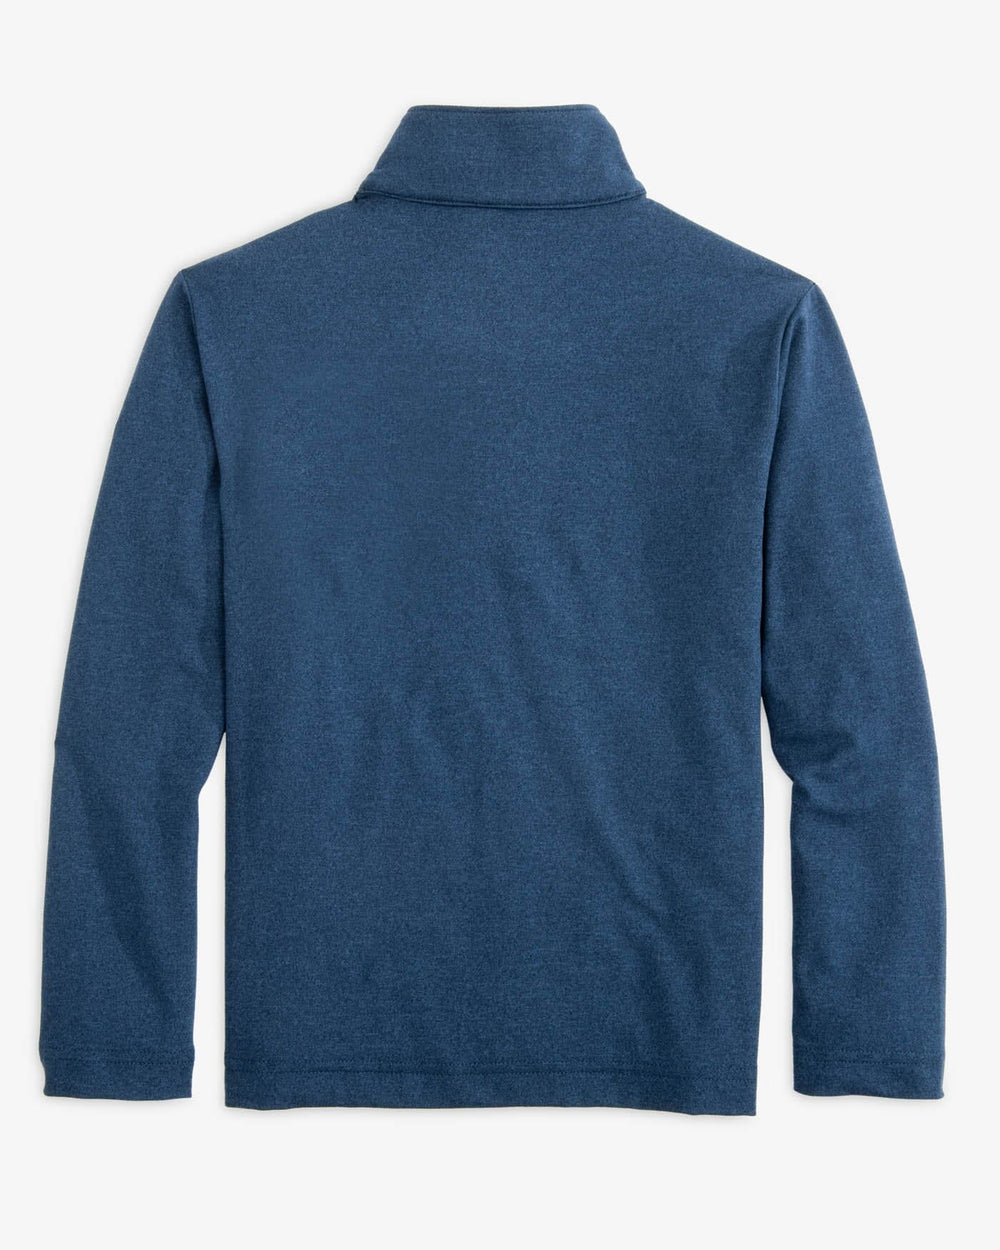 The back view of the Southern Tide Boys Heather Cruiser Quarter Zip by Southern Tide - Heather Dress Blue